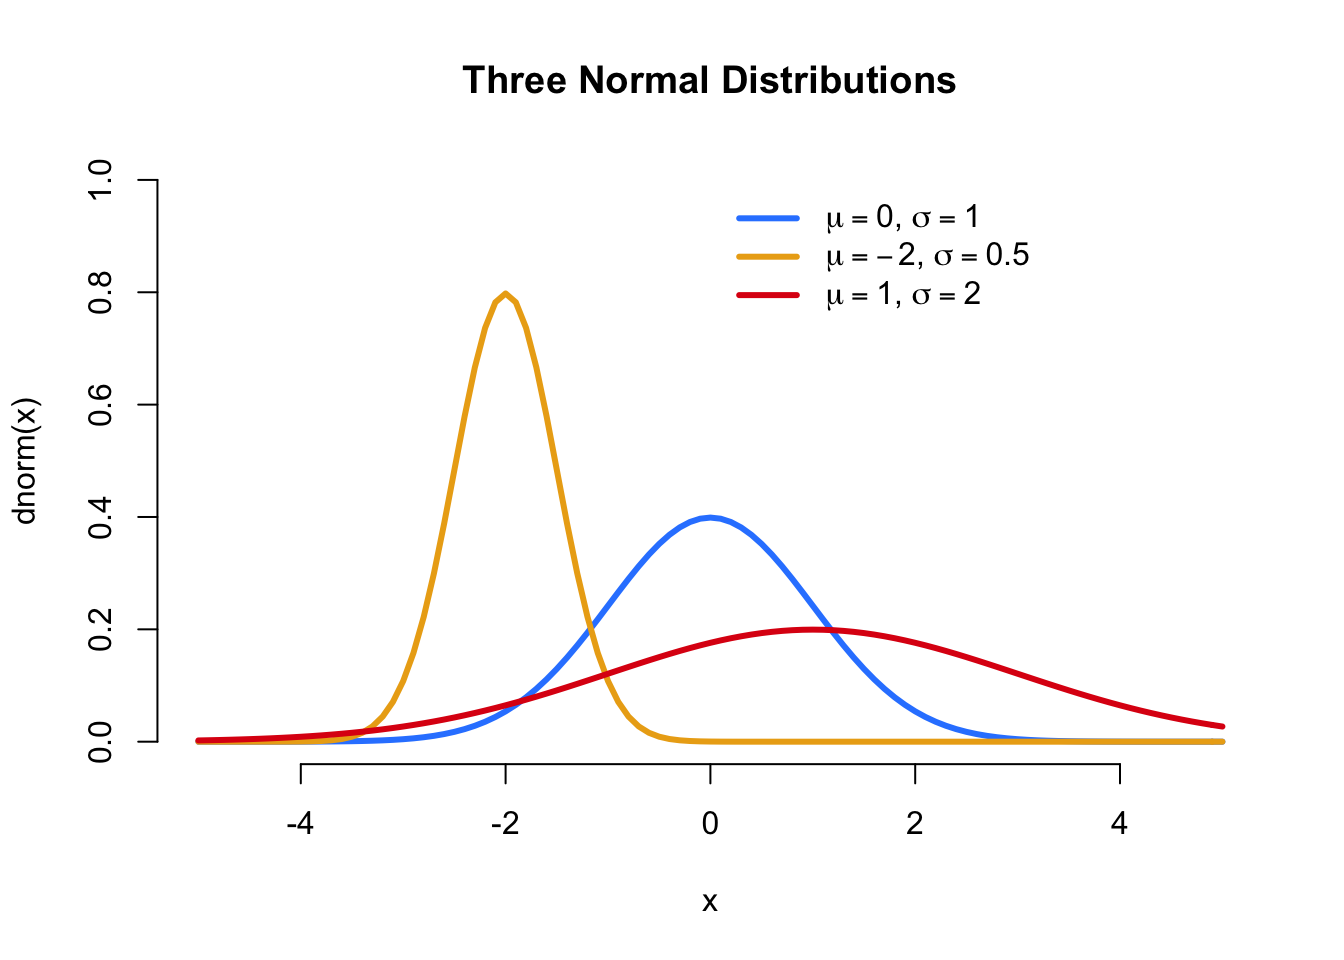 Three different normal distributions with different means and standard deviations